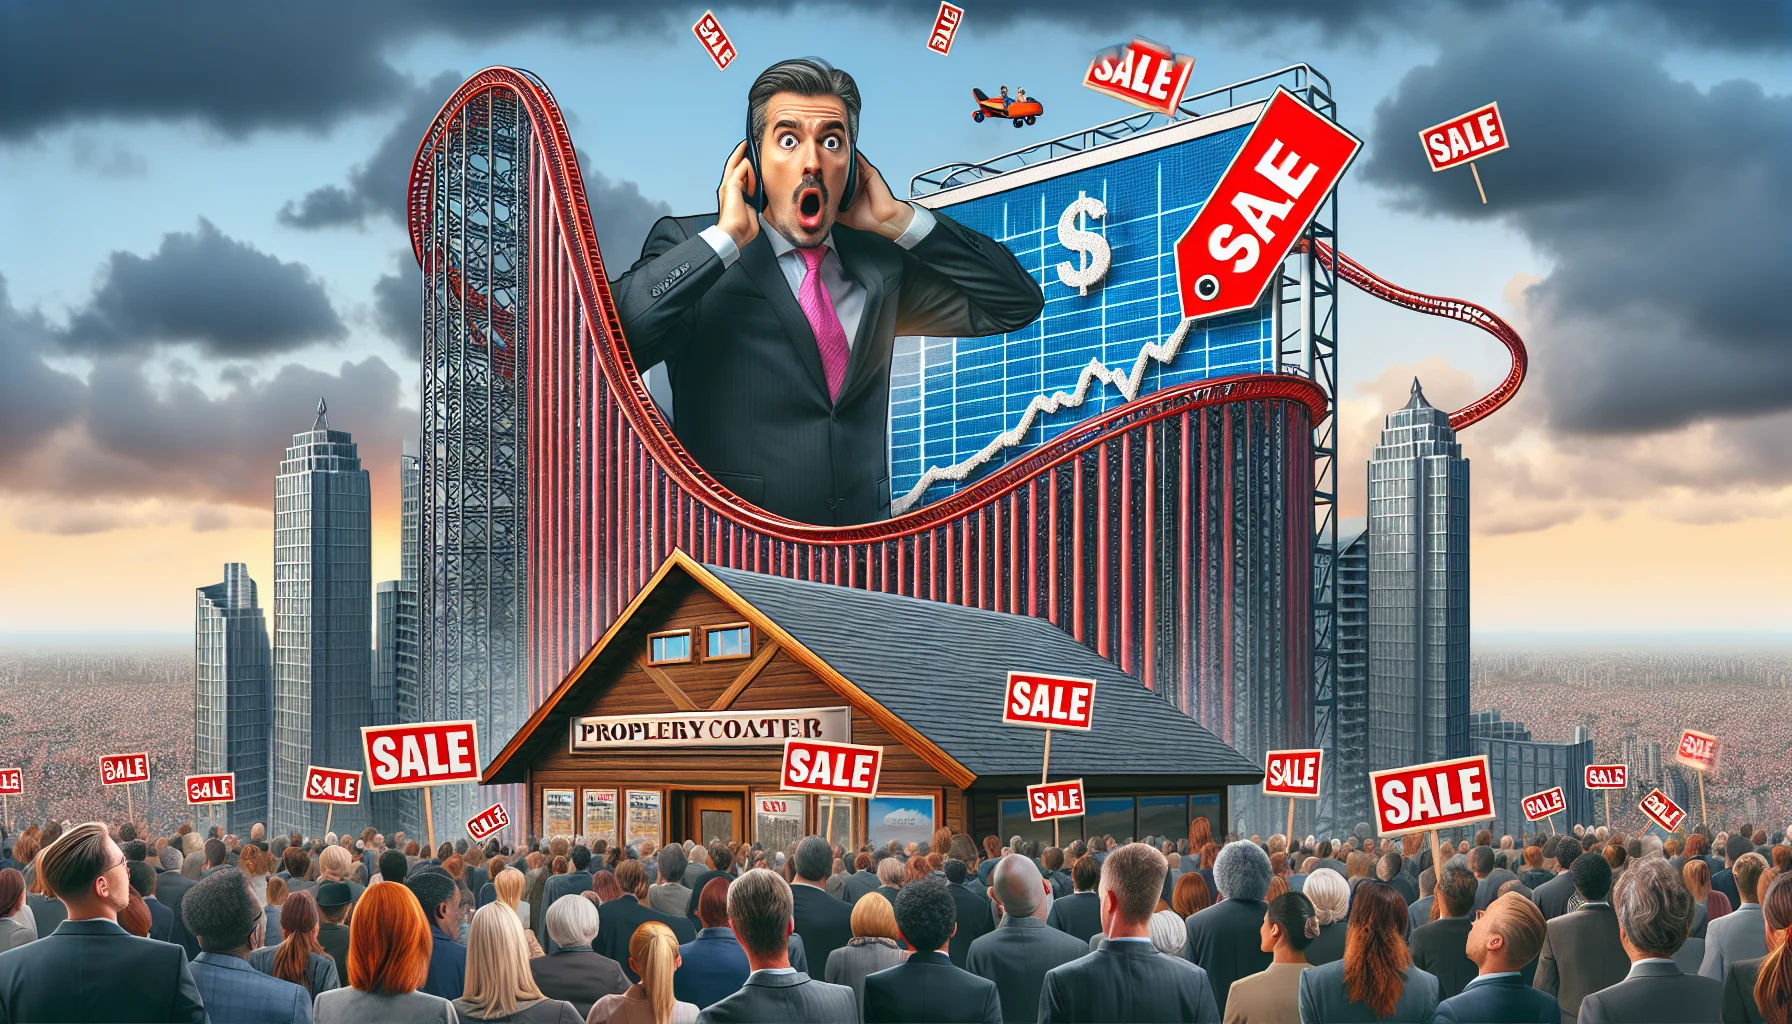 Create a comical, realistic scene indicating a hypothetical market crash in 2024 focusing on the real estate sector. The image should include a roller coaster in a property fair, symbolizing the volatile property market. It should also feature a giant sale tag draped over a skyscraper, emphasizing the falling prices, and a real estate broker, a Caucasian male in his late 40s, looking shocked while staring at plummeting housing price data on a giant screen amidst a crowd of diverse genders and descents expressing varying degrees of surprise or dismay.